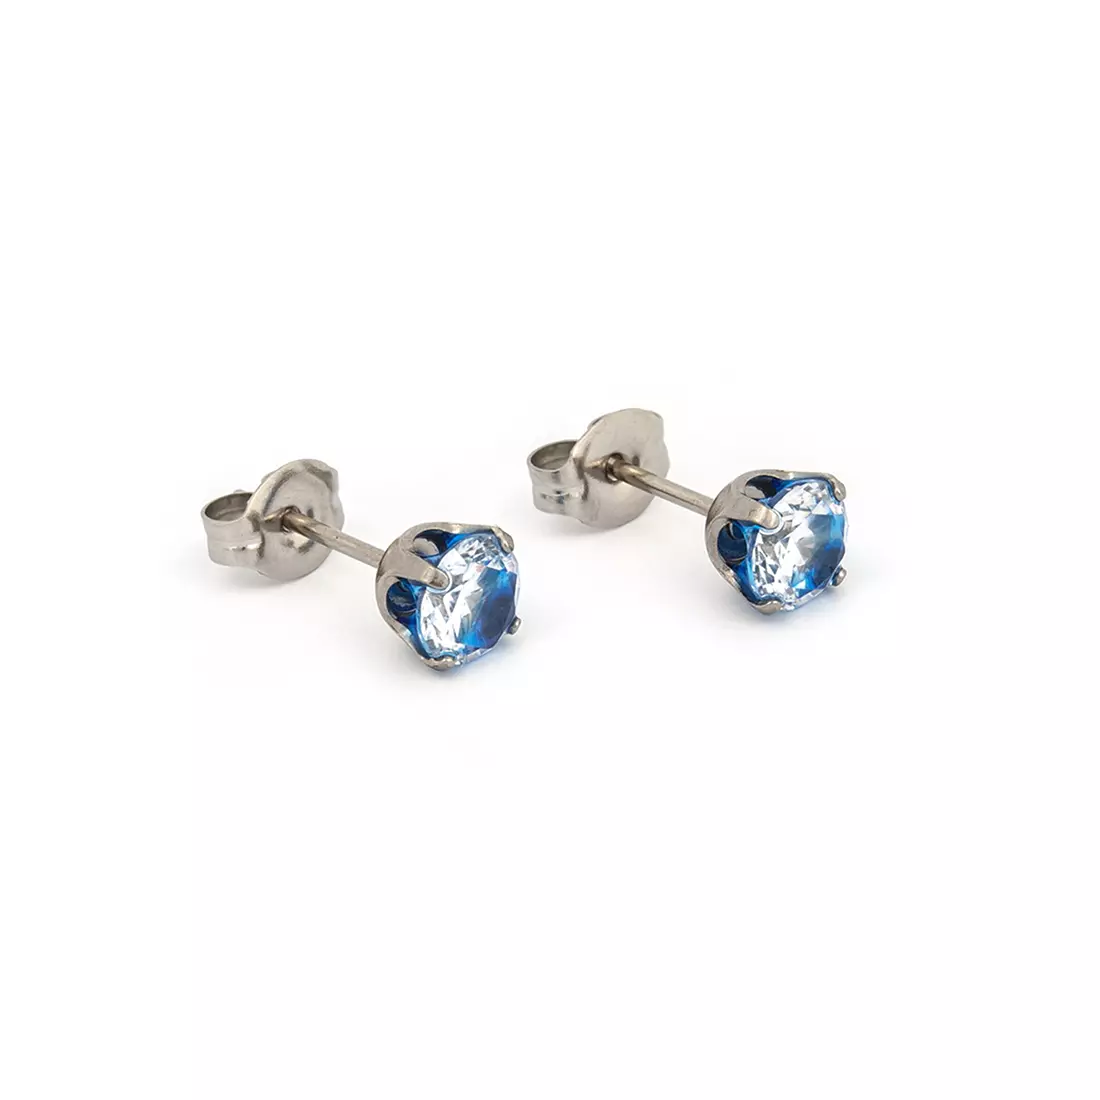 5MM Cubic Zirconia Neon Blue Allergy Free Stainless Steel Ear Studs | Ideal for everyday wear